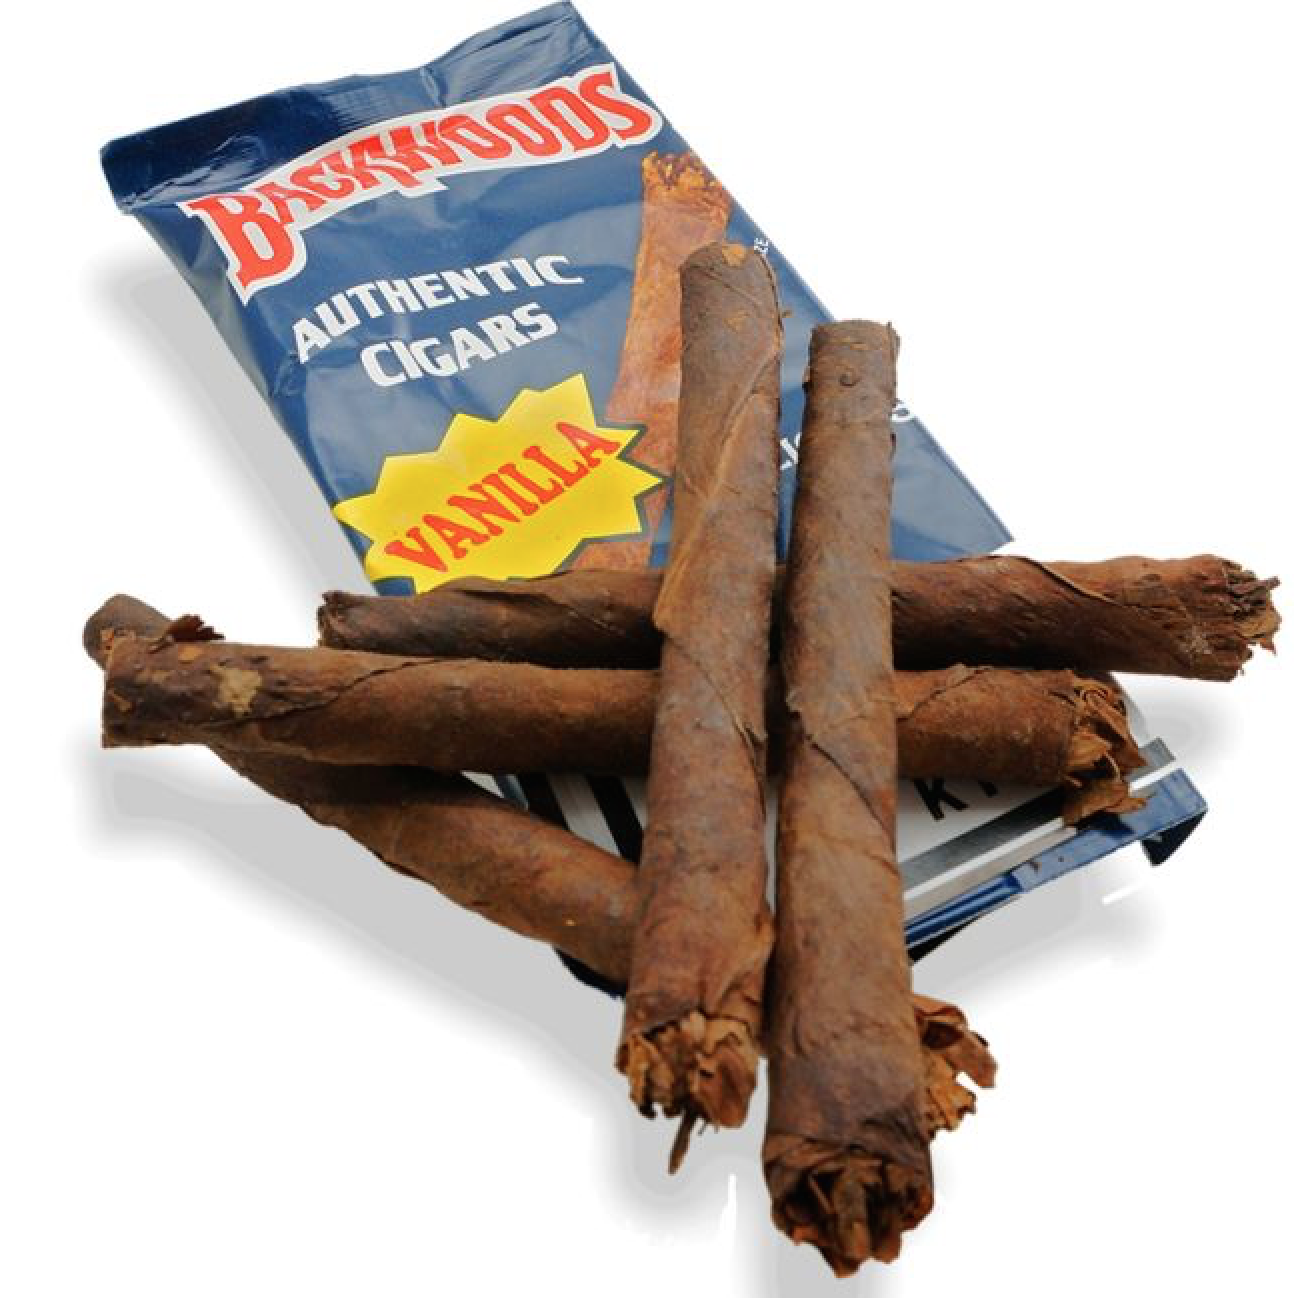 How To Roll A Backwoods Blunt